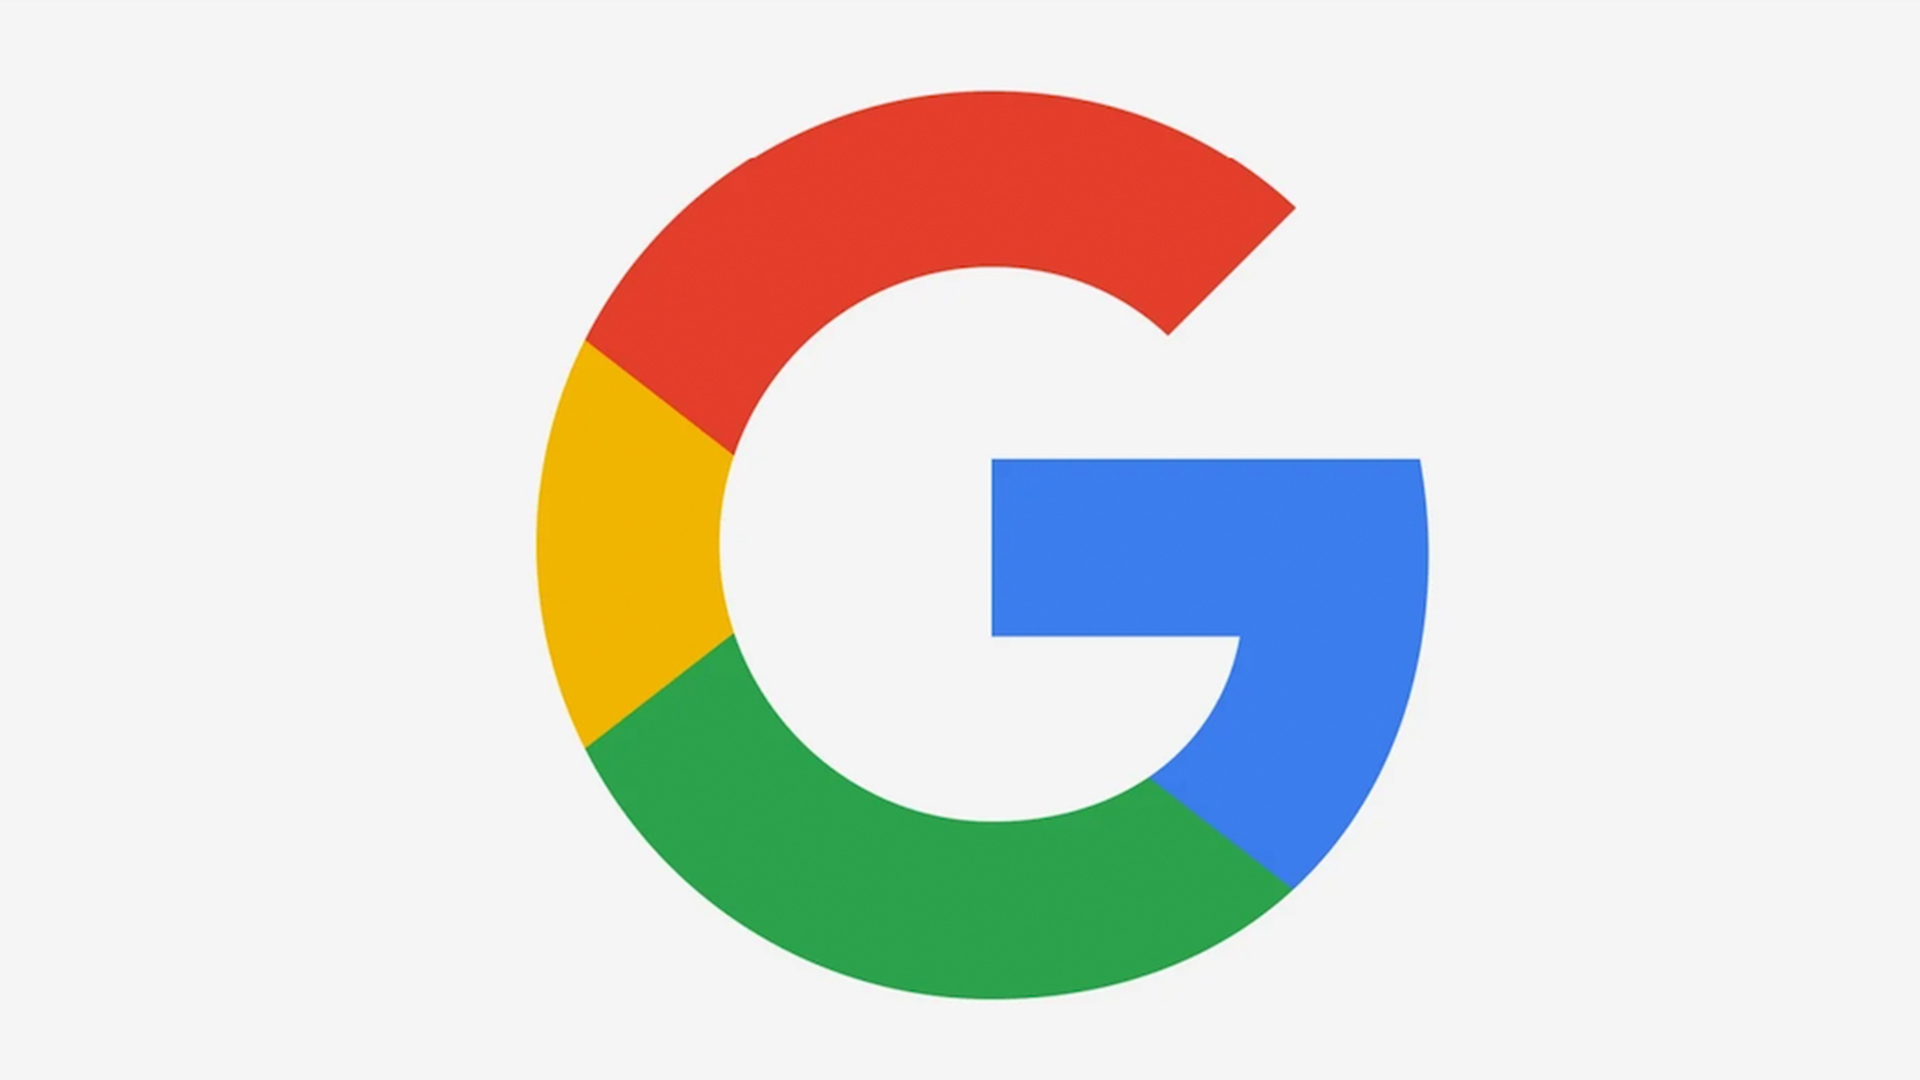 Google's new logo surprise is infuriating (and we love it